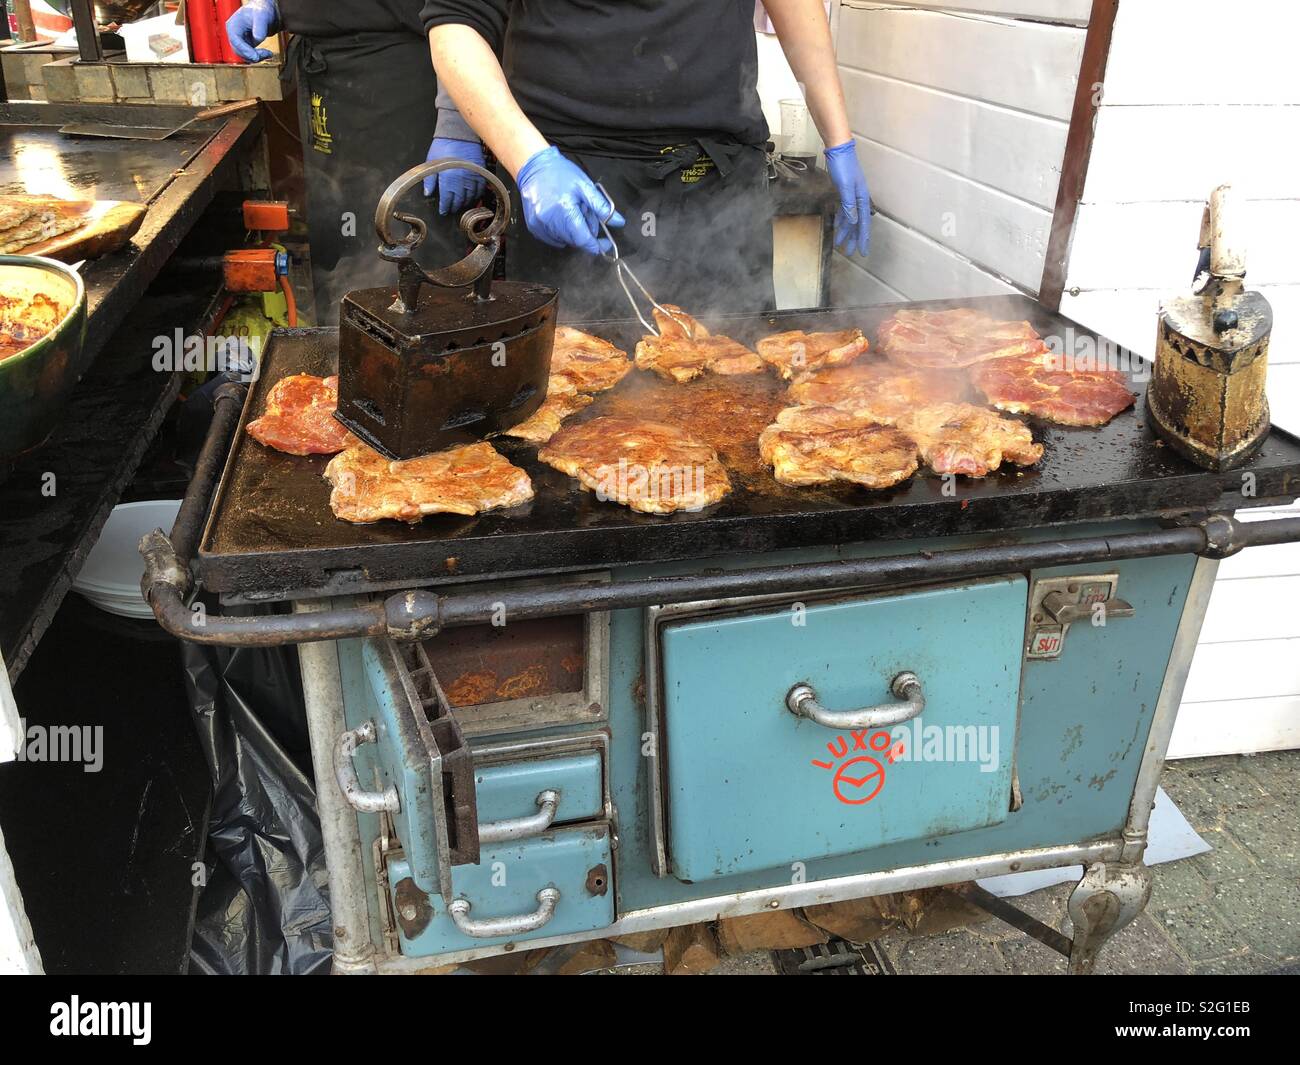 Budapest, Hungary - November 9, 2018: Christmas Market and Winter Festival at Vörösmarty Square - Pork being pressed and cooked over a coal fired Luxor grill - Image Stock Photo